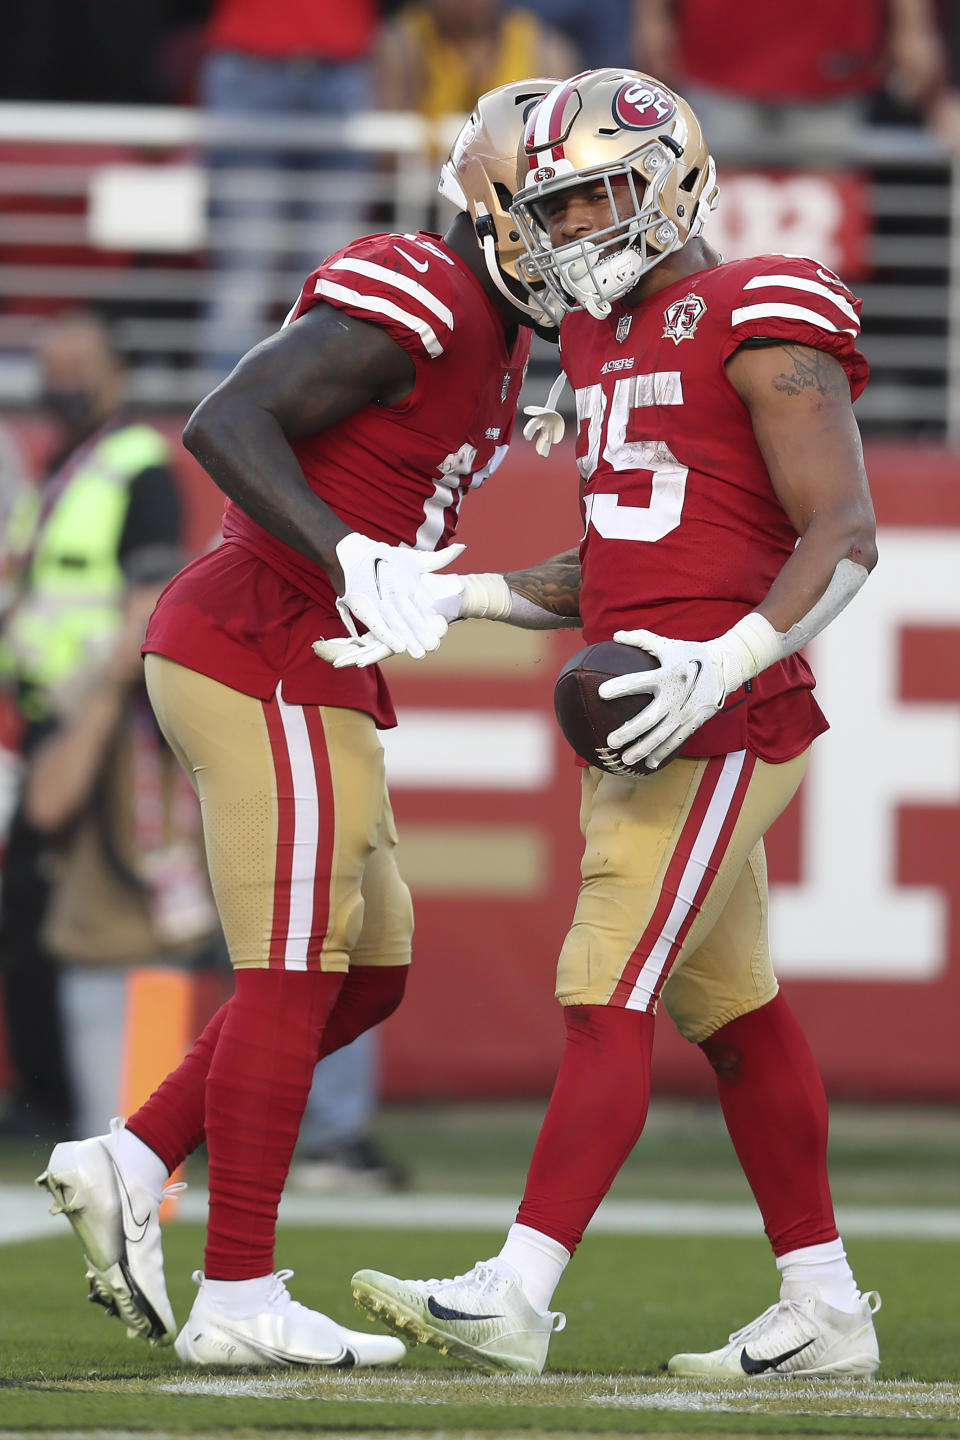 San Francisco 49ers running back Elijah Mitchell (25) is congratulated by wide receiver Deebo Samuel after scoring against the Minnesota Vikings during the second half of an NFL football game in Santa Clara, Calif., Sunday, Nov. 28, 2021. (AP Photo/Jed Jacobsohn)